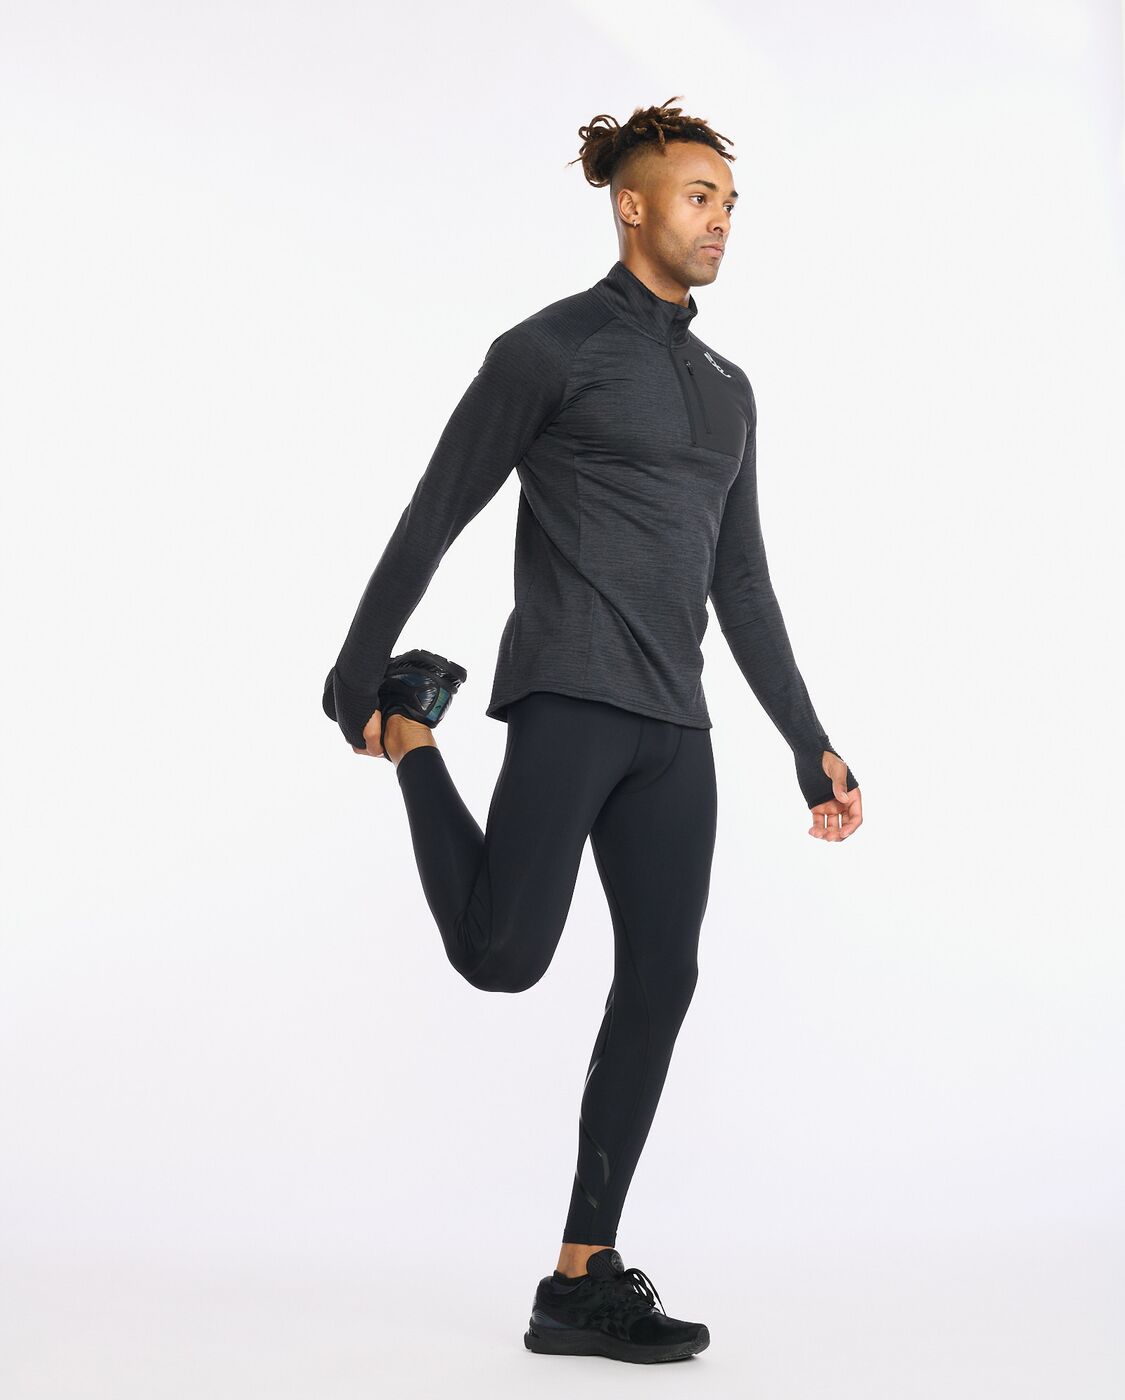 2XU South Africa - Men's Ignition layered 1/4 Zip Long Sleeve - Black/Silver Reflective